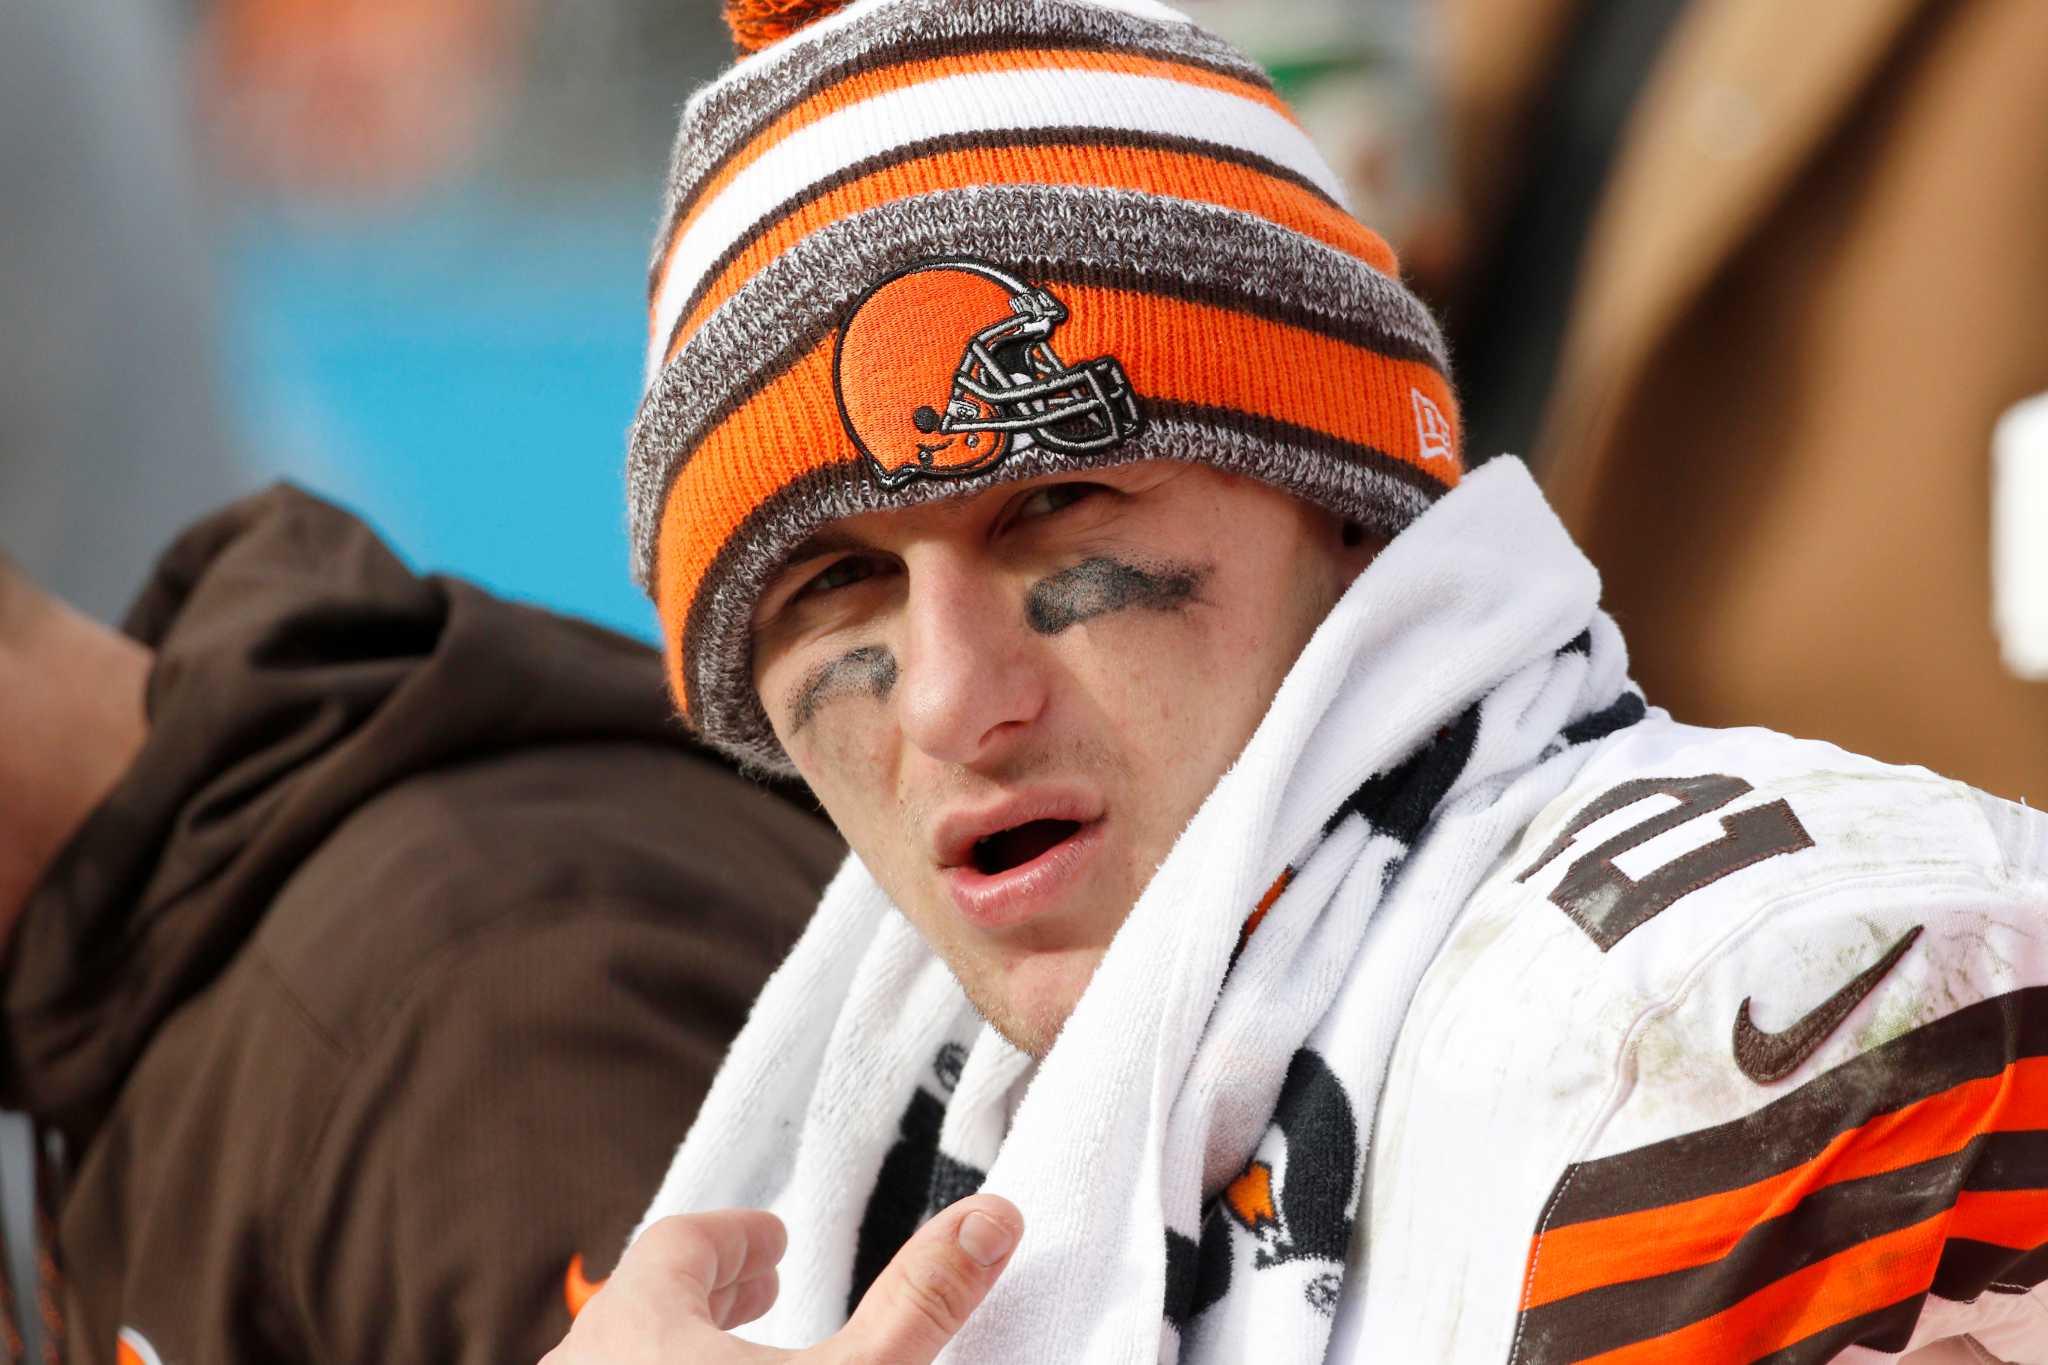 Browns&; Manziel Says He Let Down Fans Antonio Express News